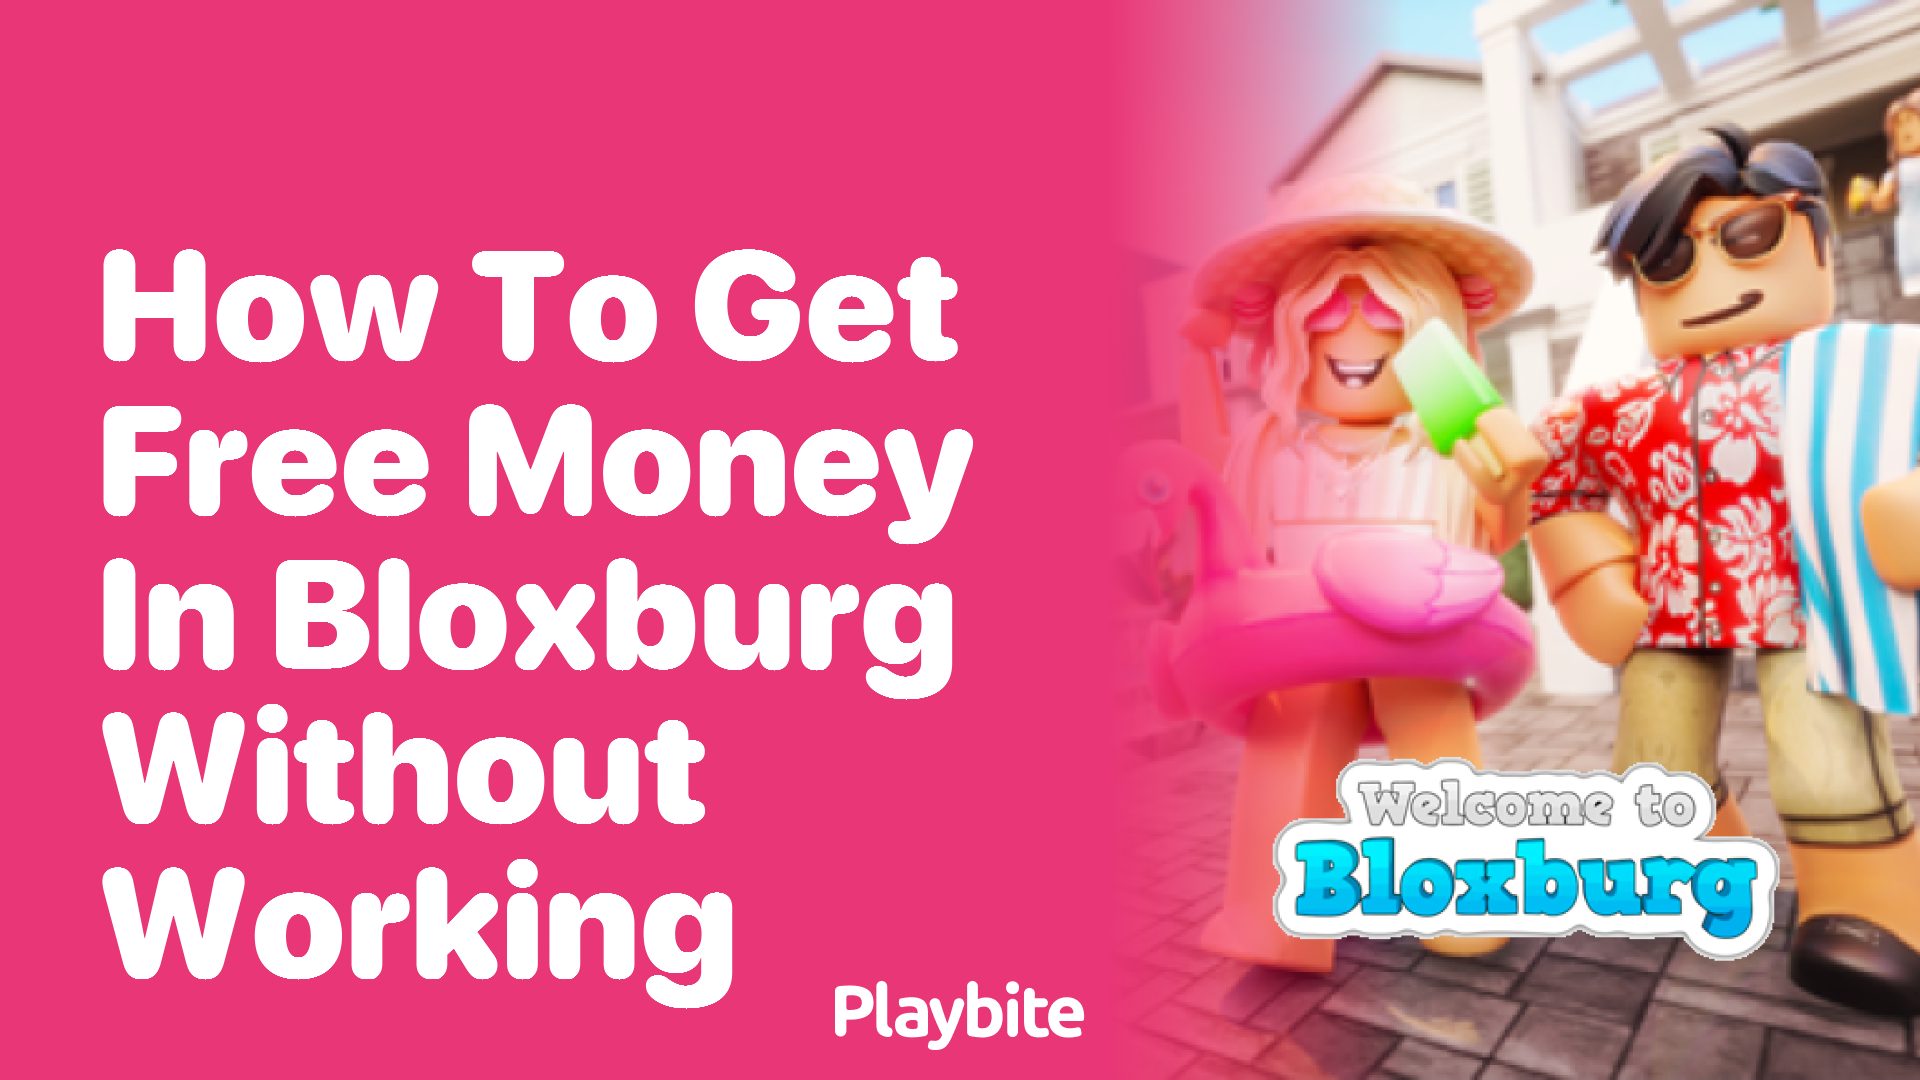 How to Get Free Money in Bloxburg Without Working